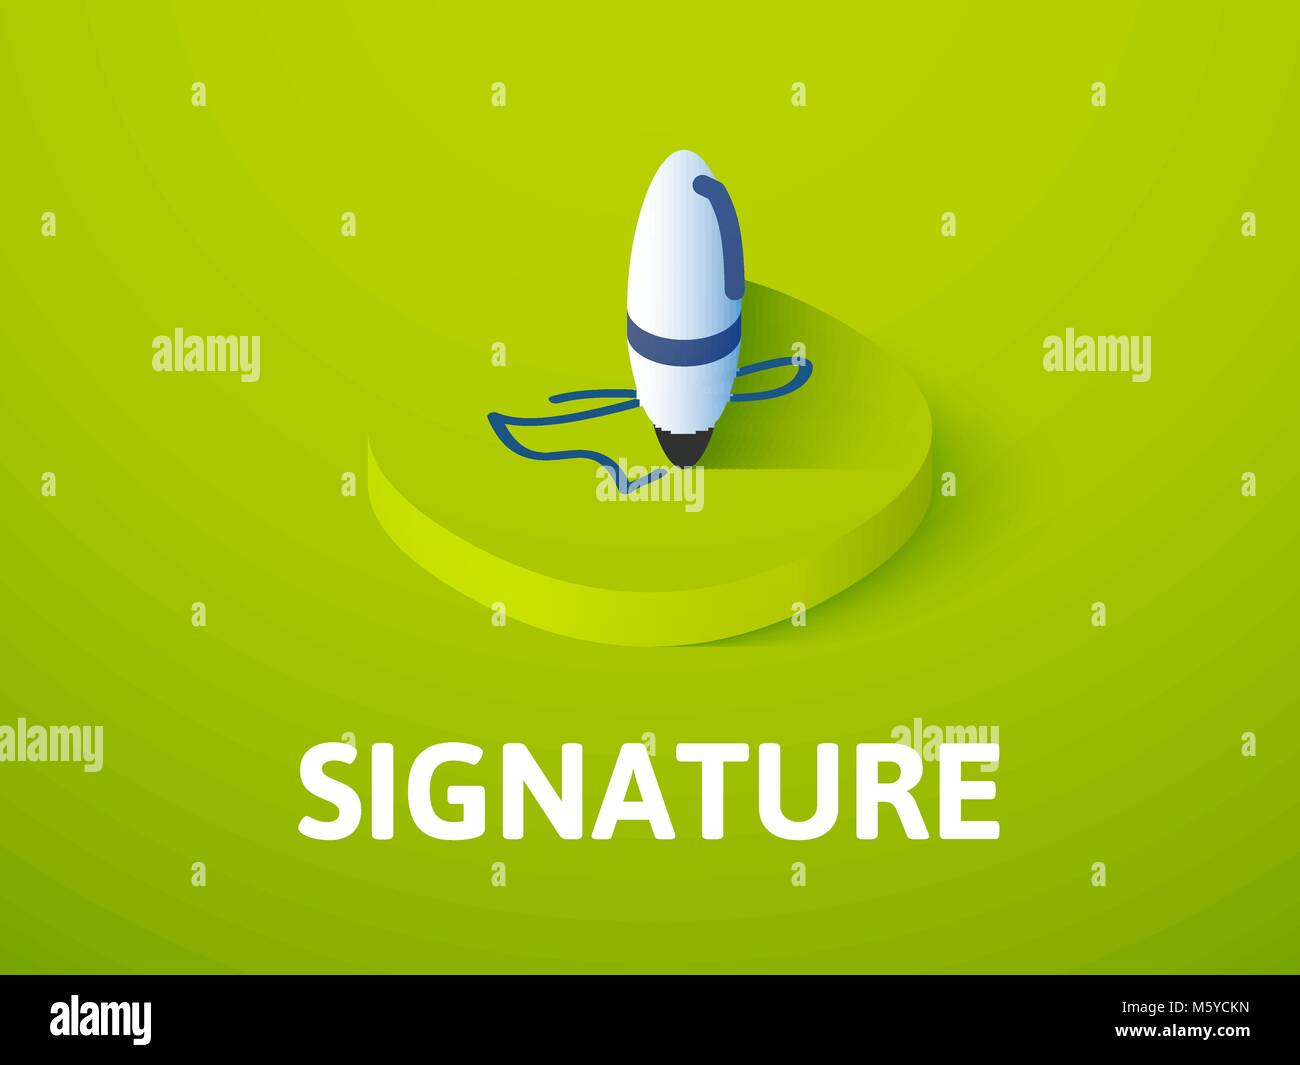 Signature isometric icon, isolated on color background Stock Vector